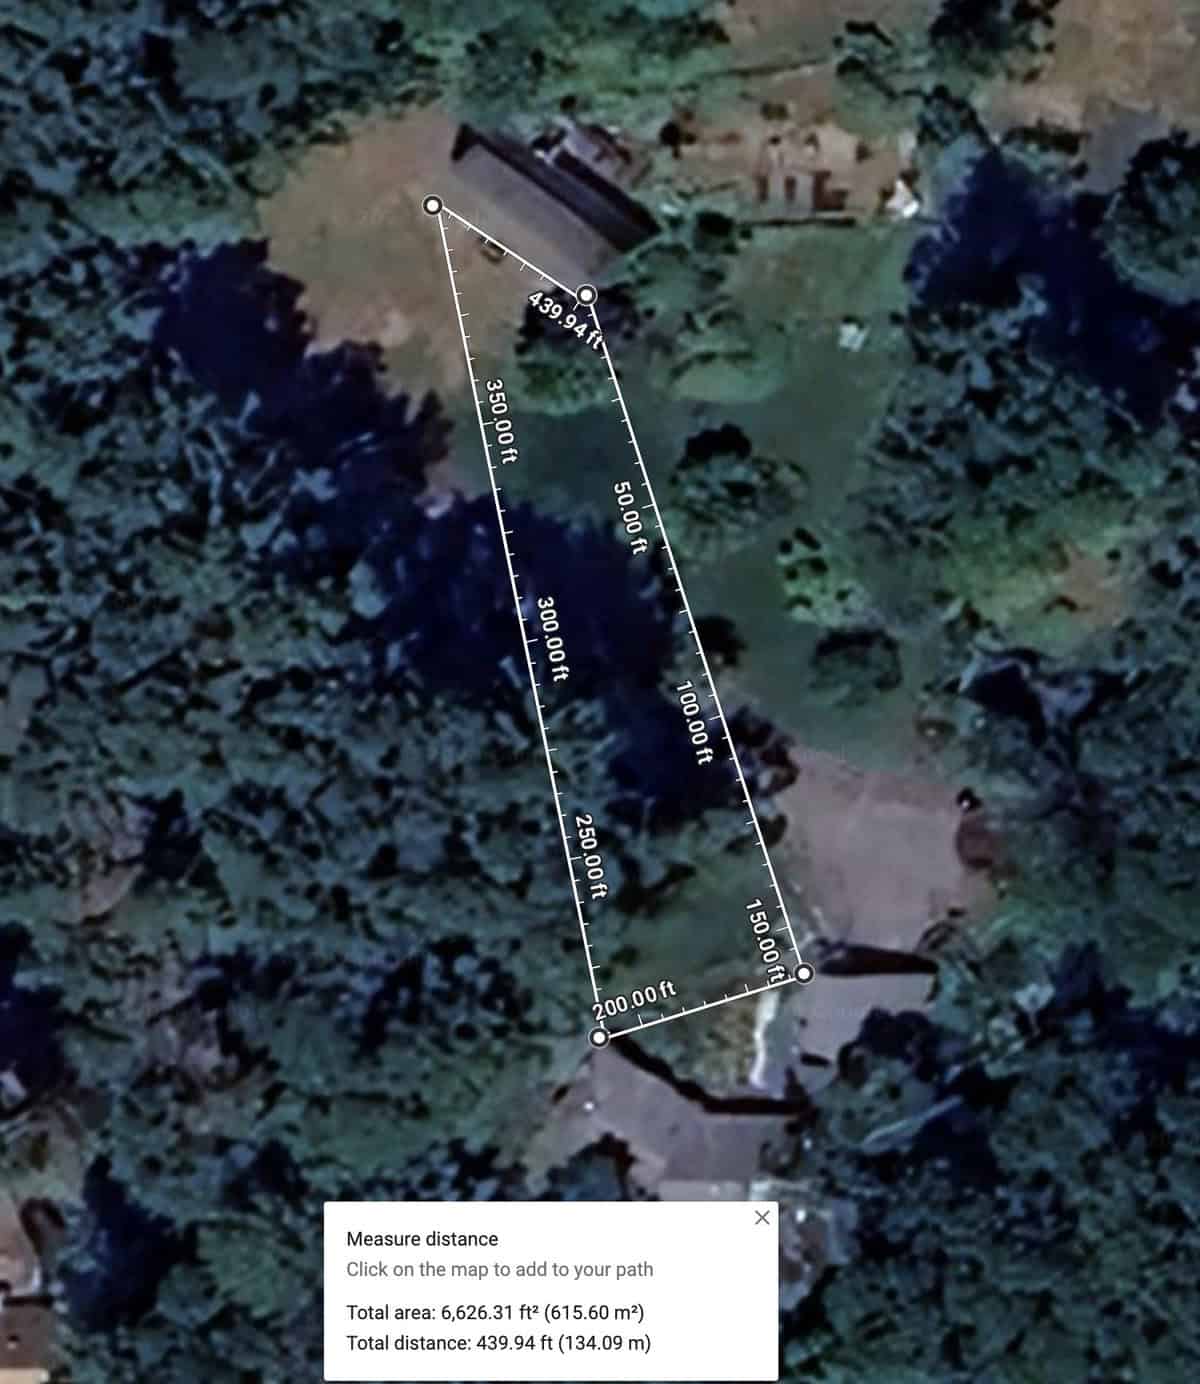 A satellite image of a plot of land surrounded by dense trees. The plot is outlined with white lines, showing dimensions: 439.94 ft, 100.00 ft, 250.00 ft, 150.00 ft, 500.00 ft, and 359.00 ft—ideal for planning a garden design! Measurement data indicates an area of 6,626.31